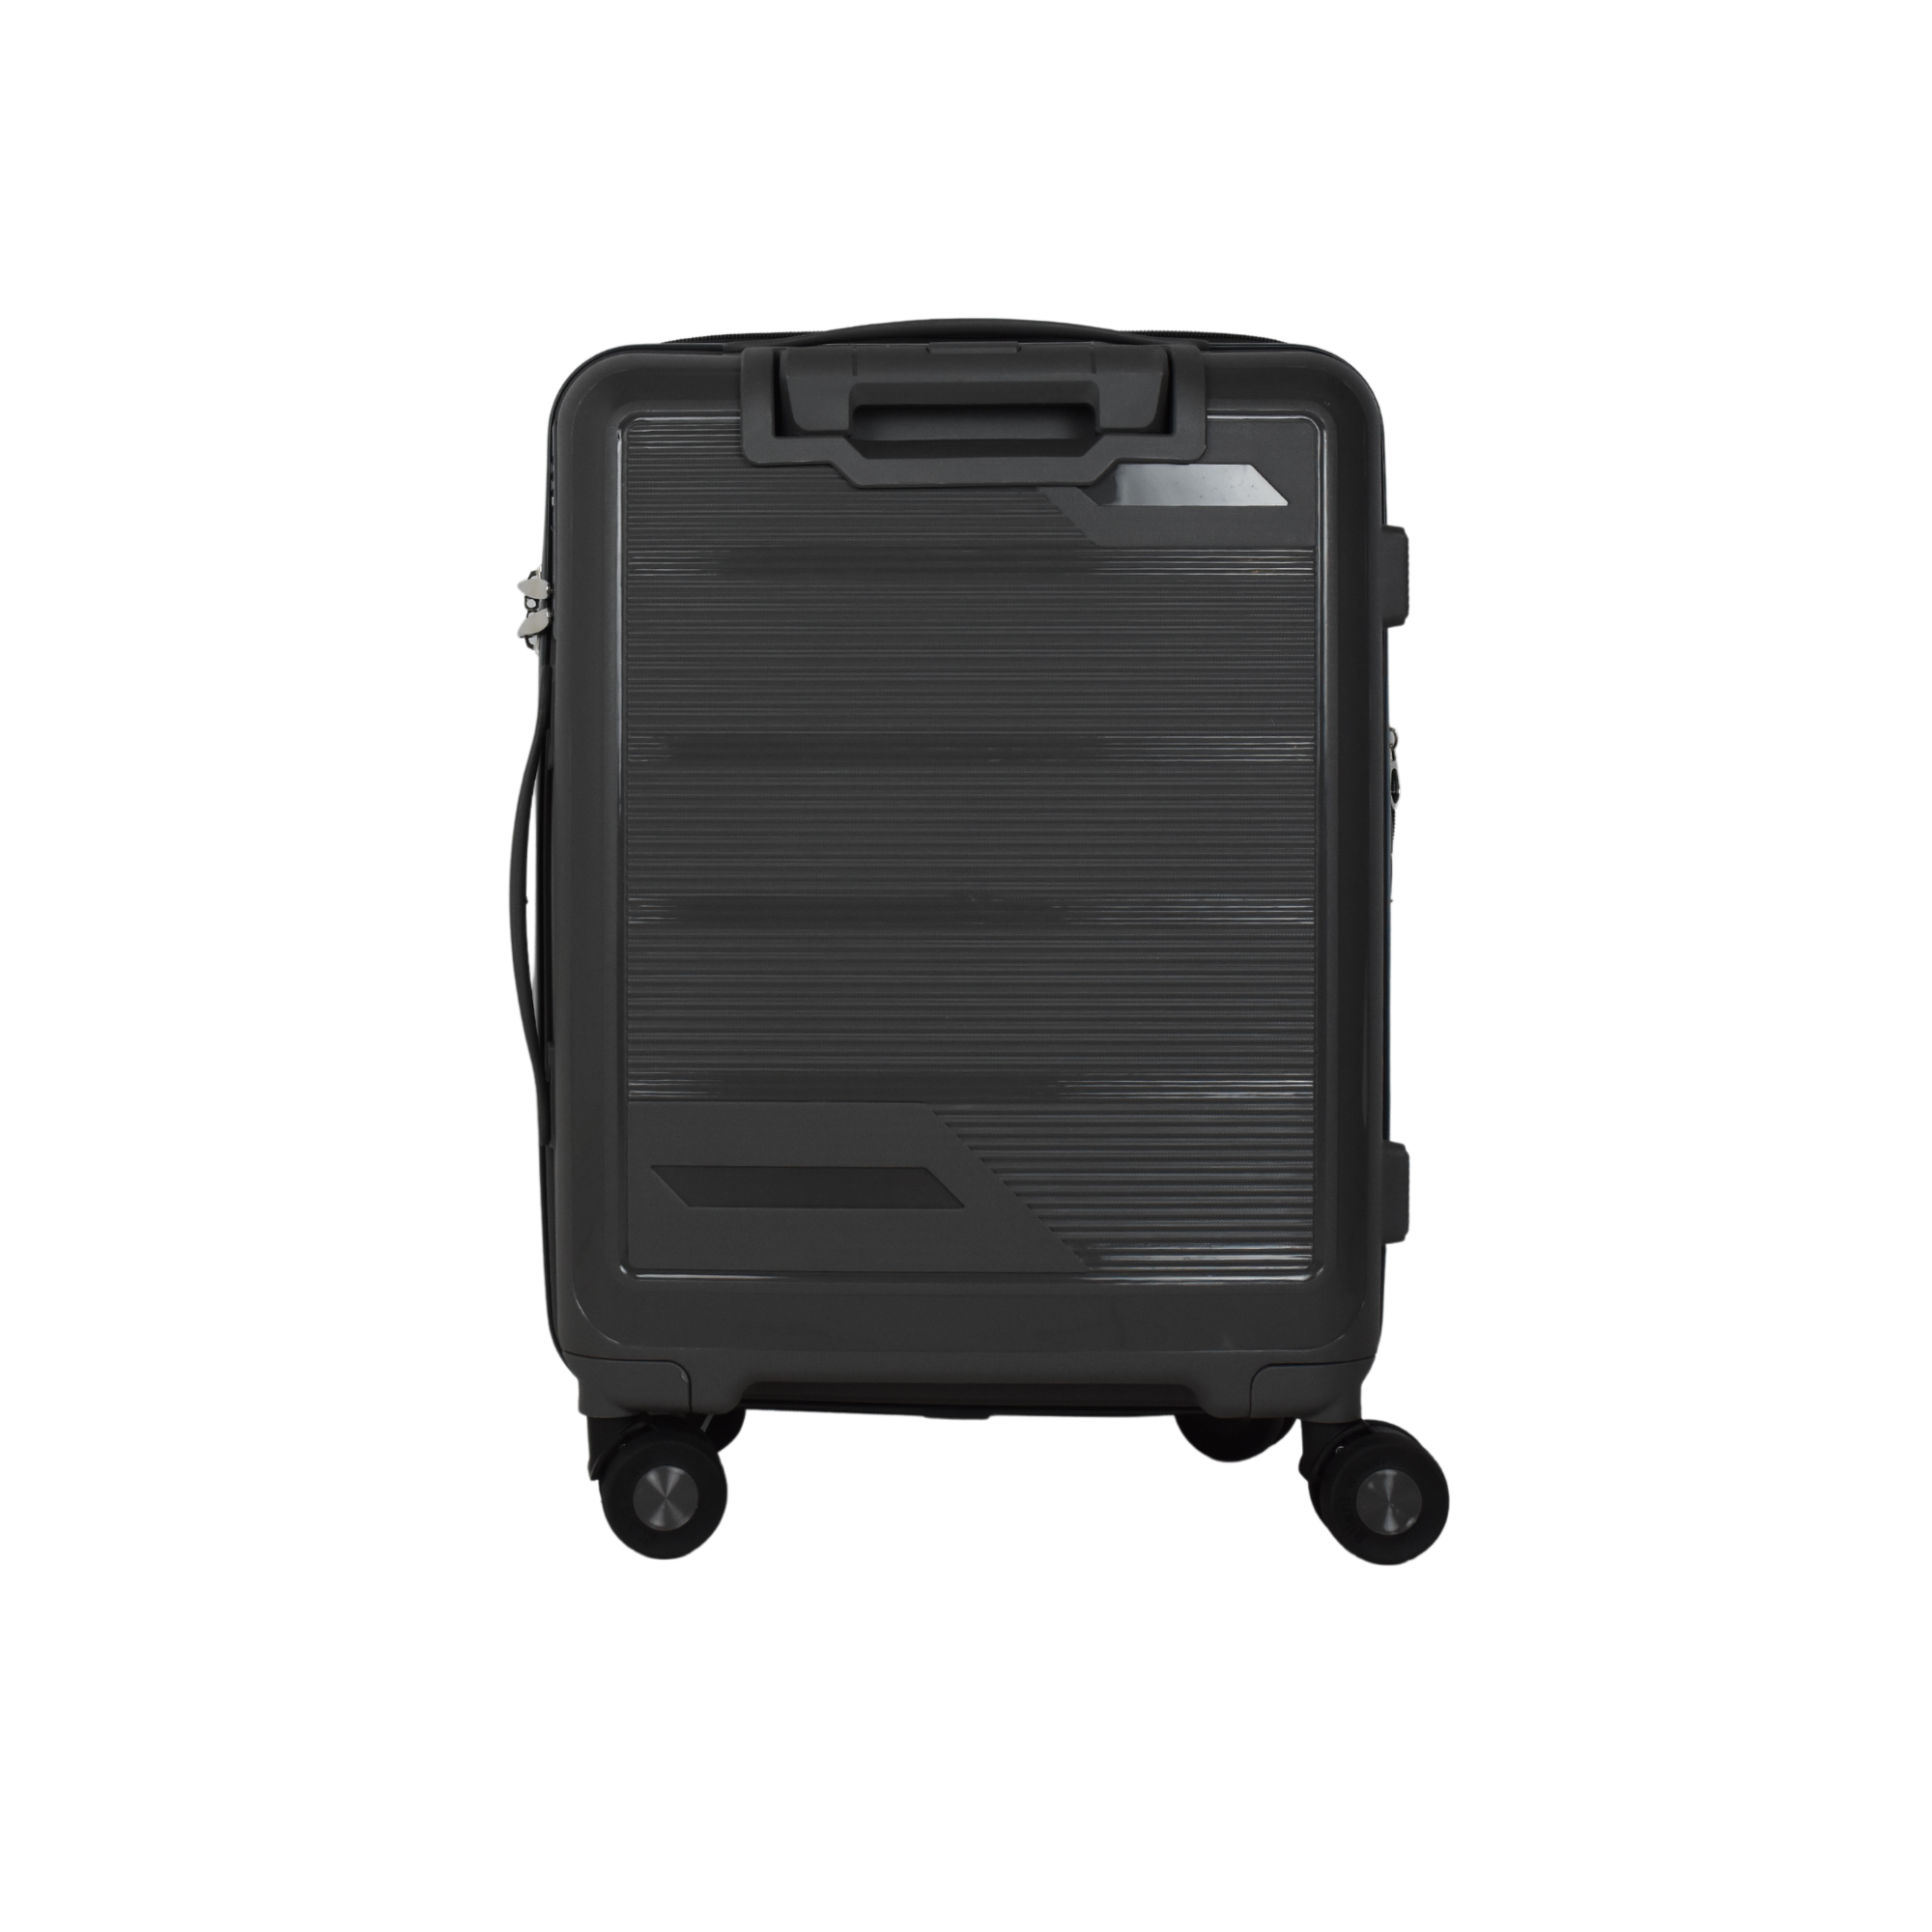 PIGEON  hard shell trolley case set of 3+1 unbreakable PP